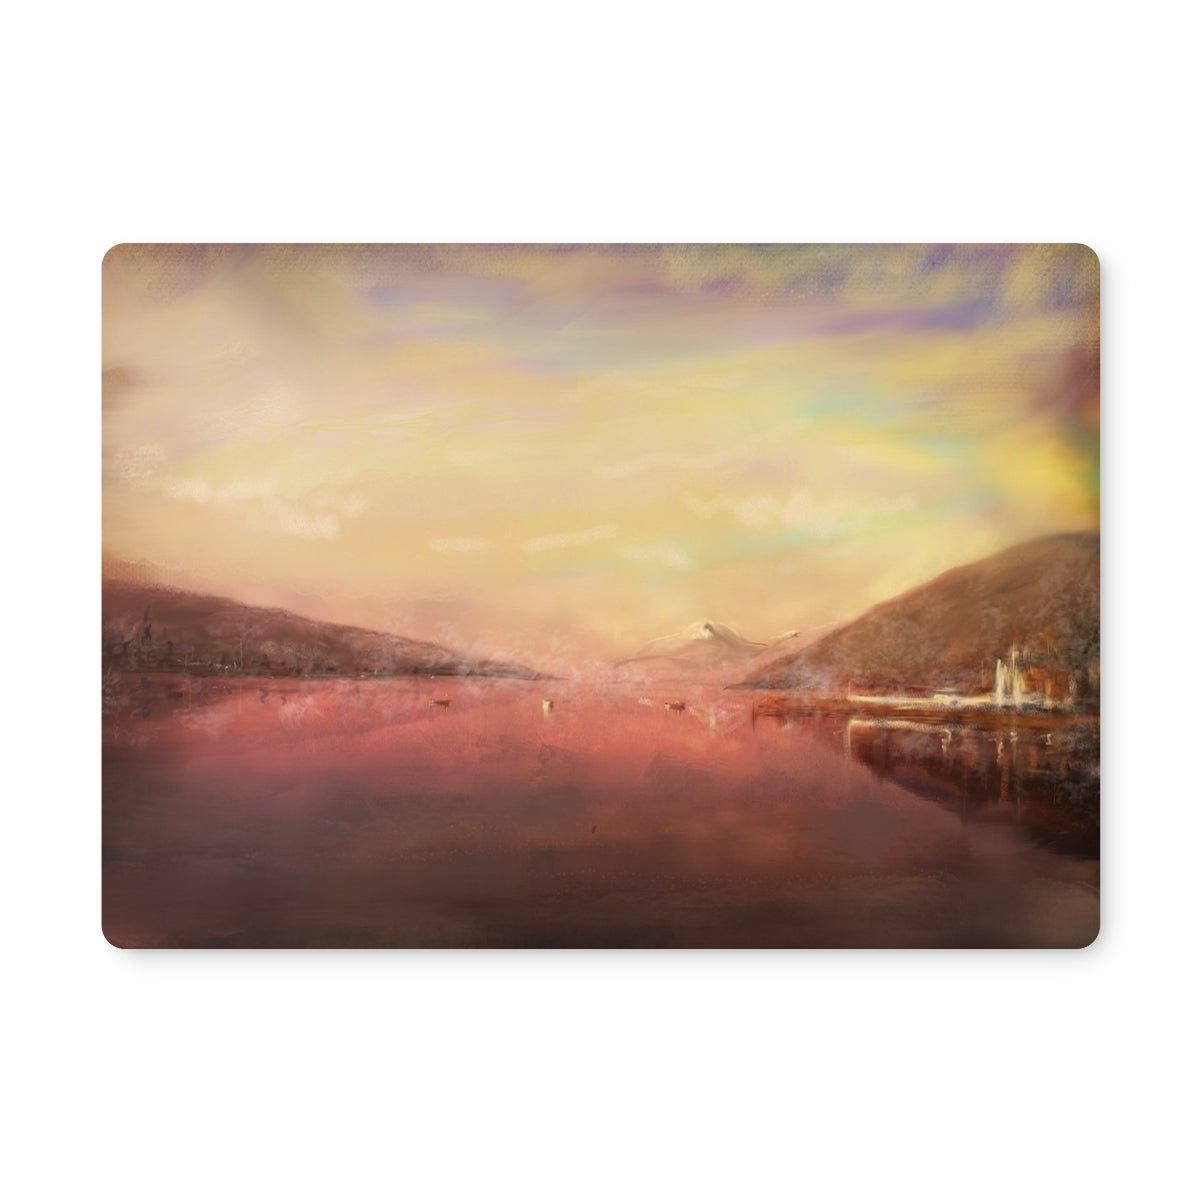 Loch Tay Art Gifts Placemat-Placemats-Scottish Lochs & Mountains Art Gallery-Single Placemat-Paintings, Prints, Homeware, Art Gifts From Scotland By Scottish Artist Kevin Hunter